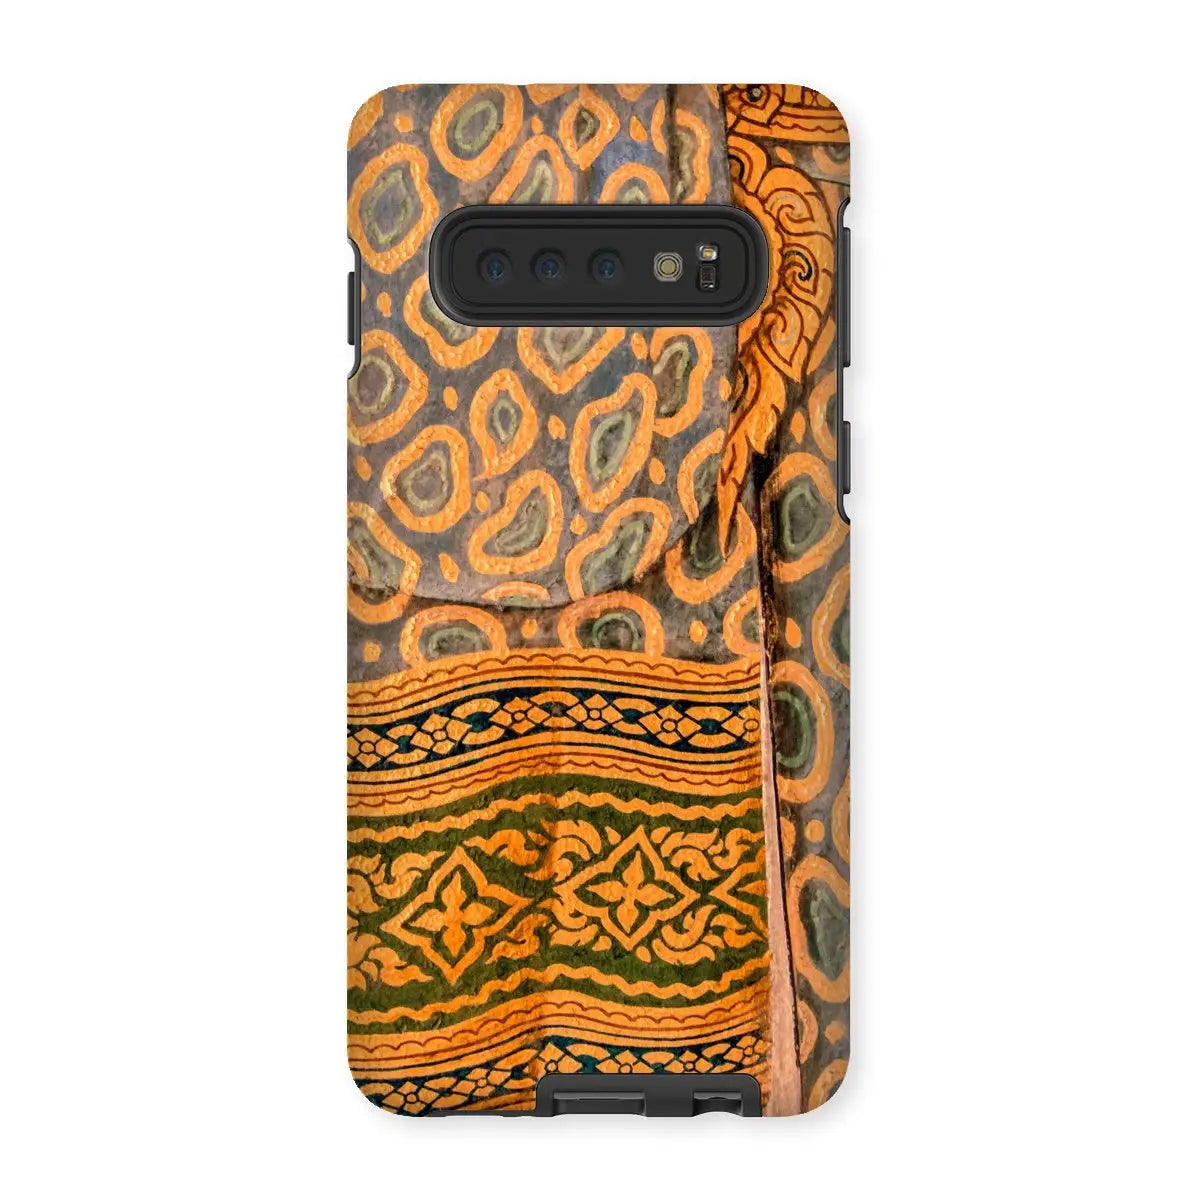 Lady In Waiting - Royal Siam Mural Art Phone Case - Samsung Galaxy S10 / Matte - Mobile Phone Cases - Aesthetic Art